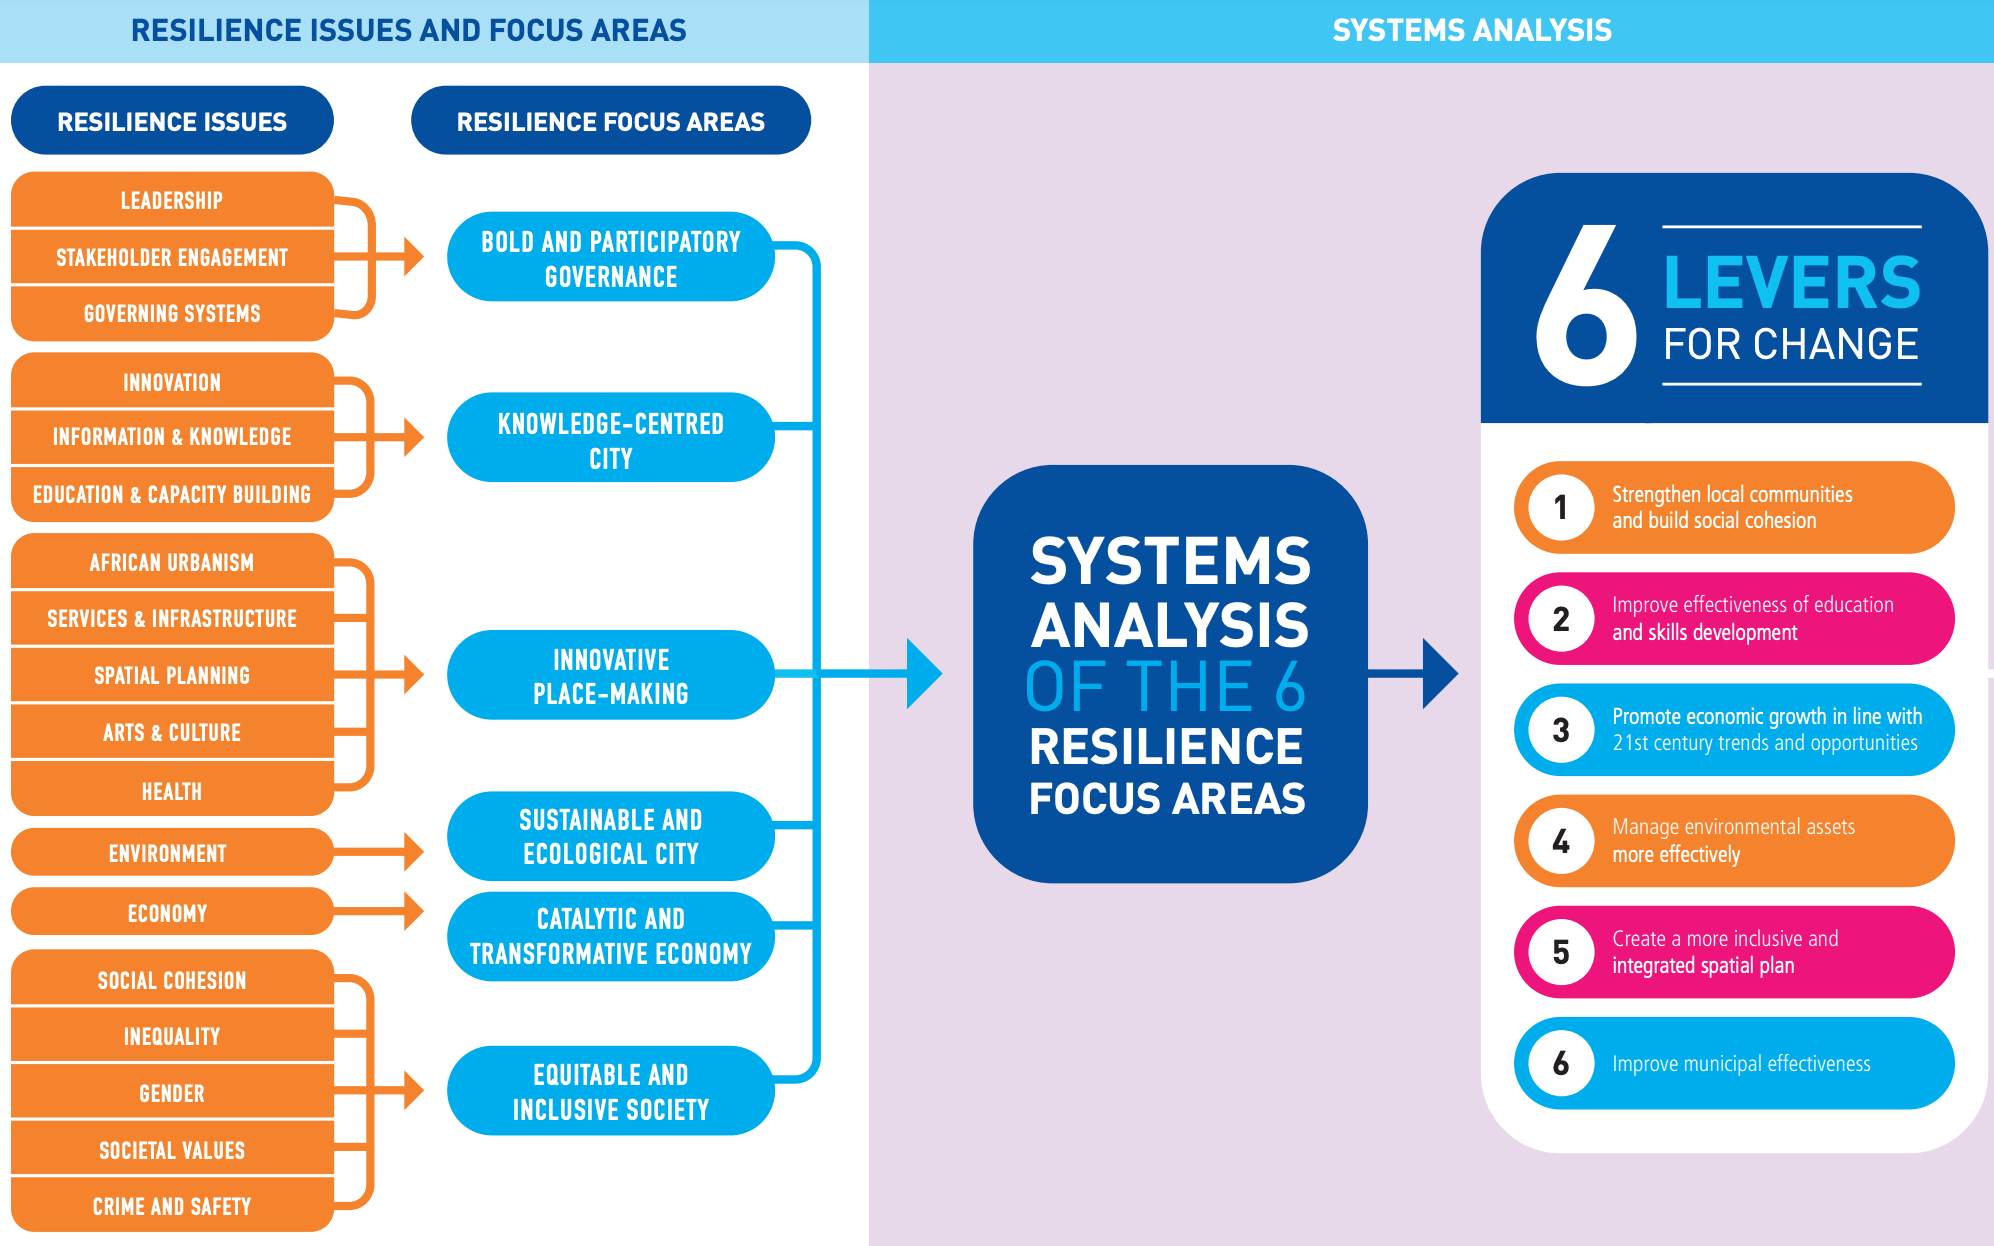 https://resilientcitiesnetwork.org/downloadable_resources/Network/Durban-Resilience-Strategy-English.pdf